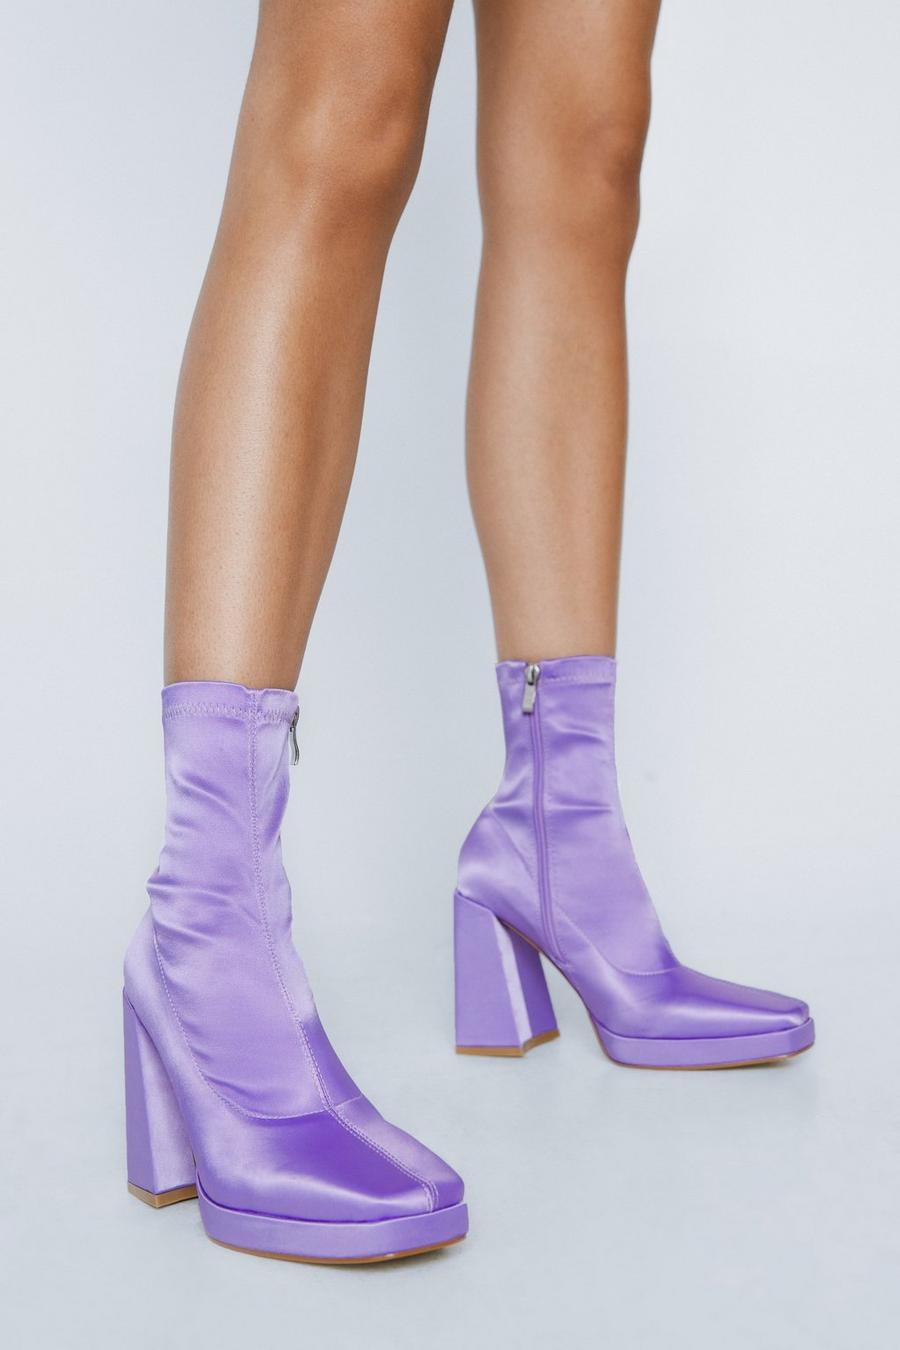 Satin Square Toe Ankle Sock Boots